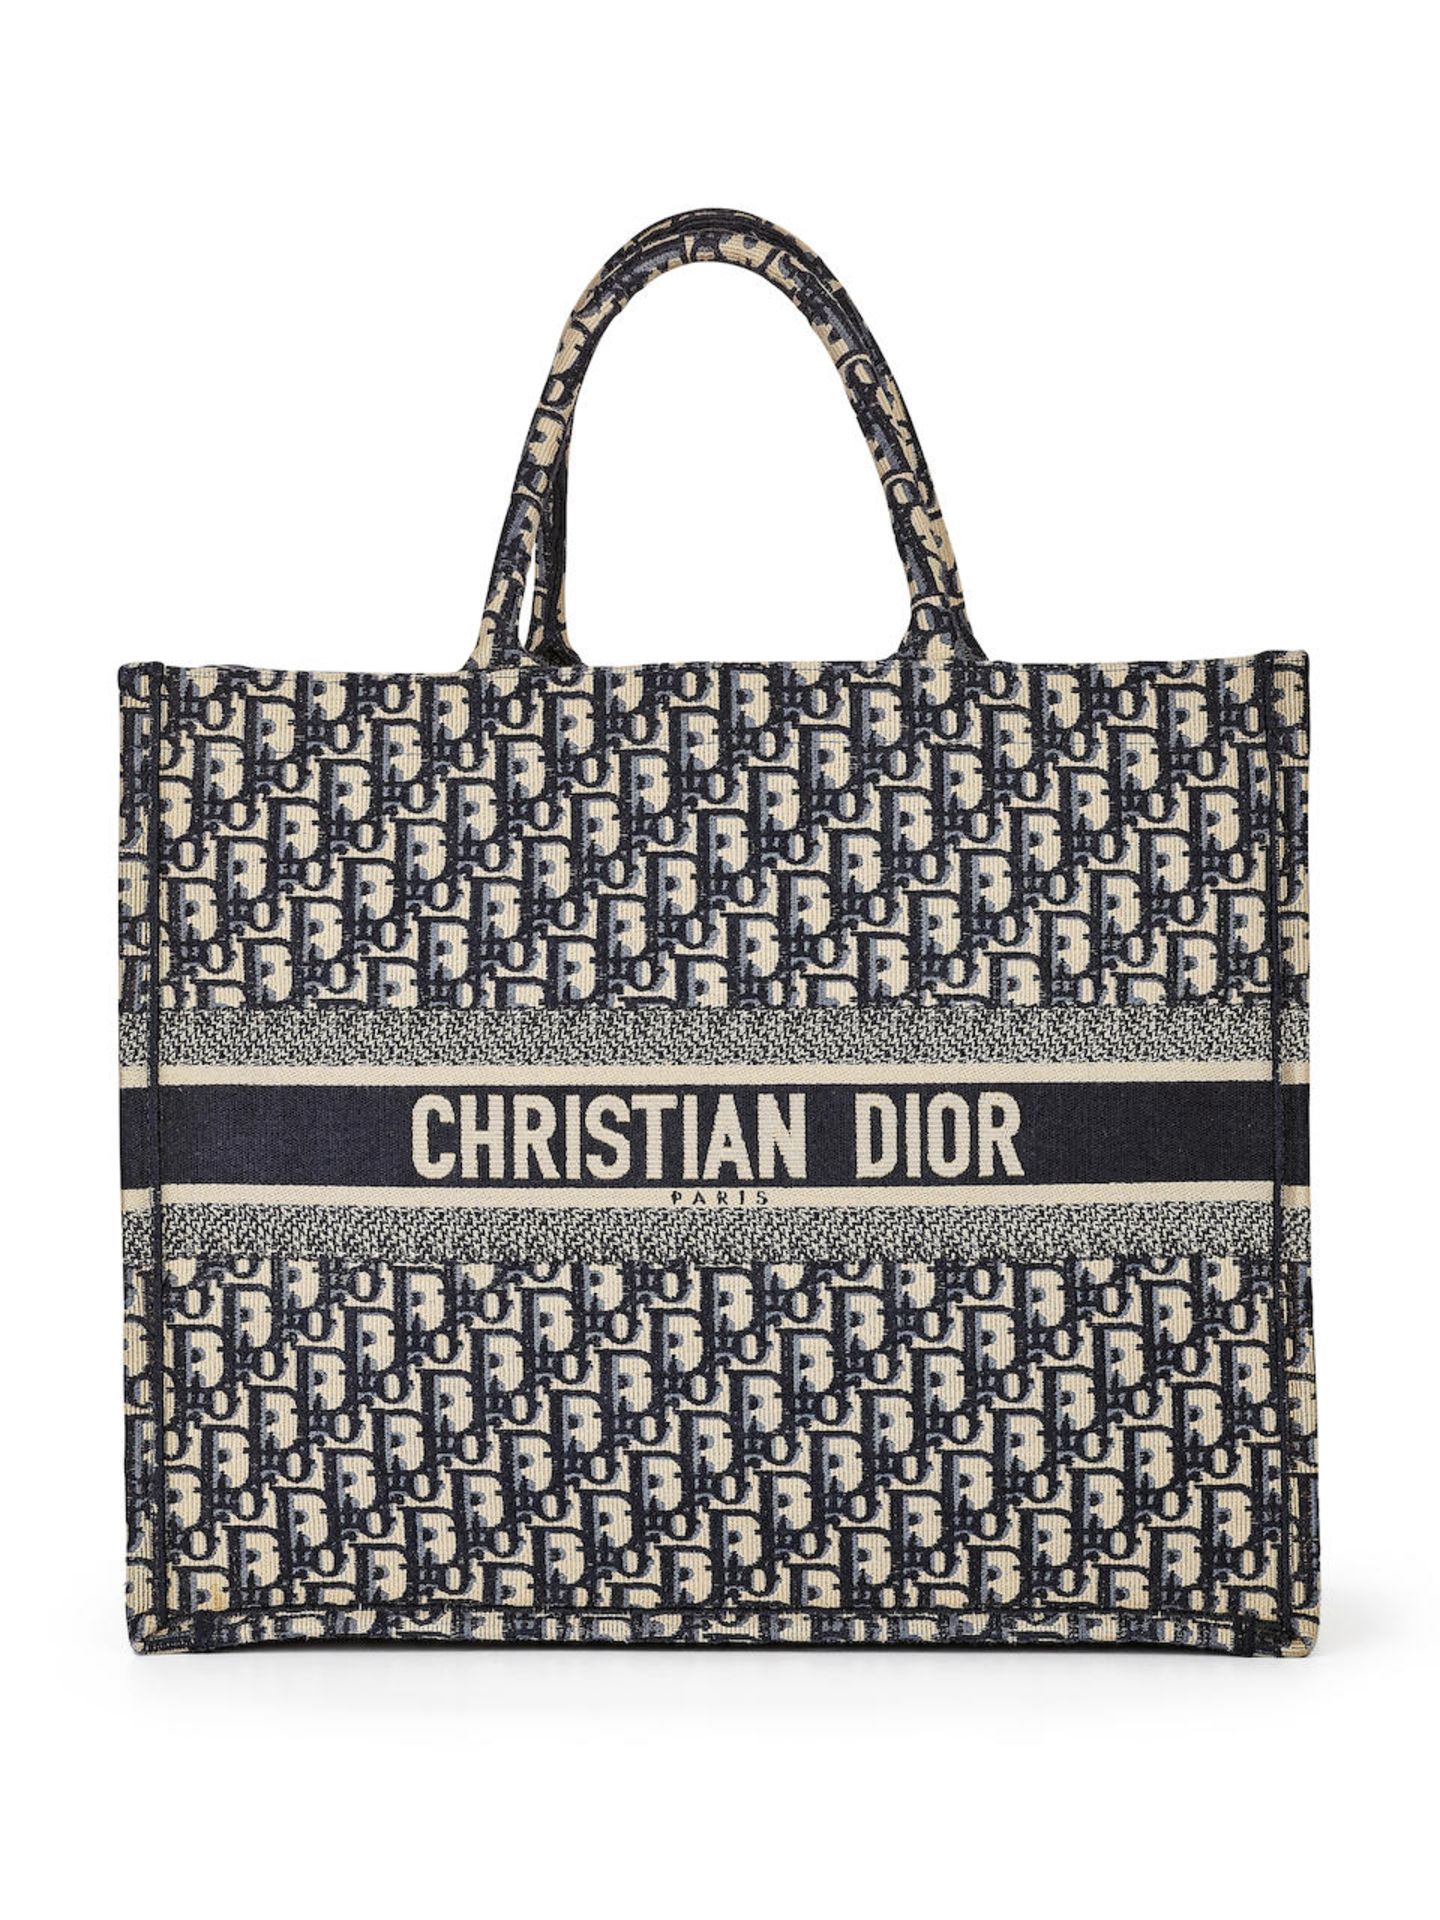 CHRISTIAN DIOR: OBLIQUE EMBROIDERY CANVAS LARGE BOOK TOTE